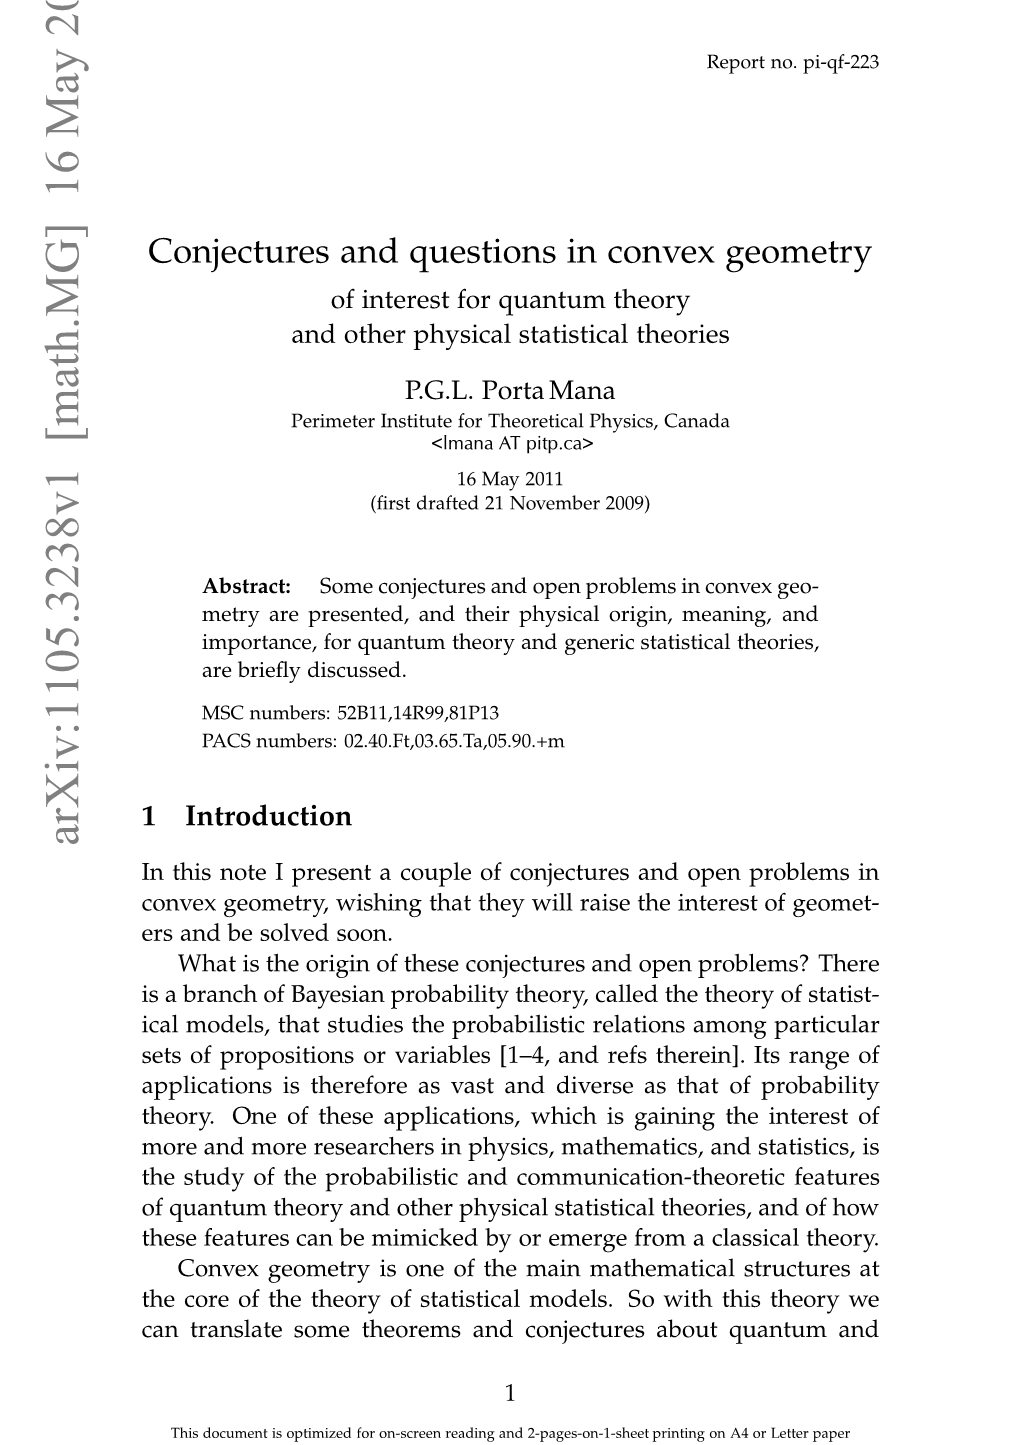 Conjectures and Questions in Convex Geometry